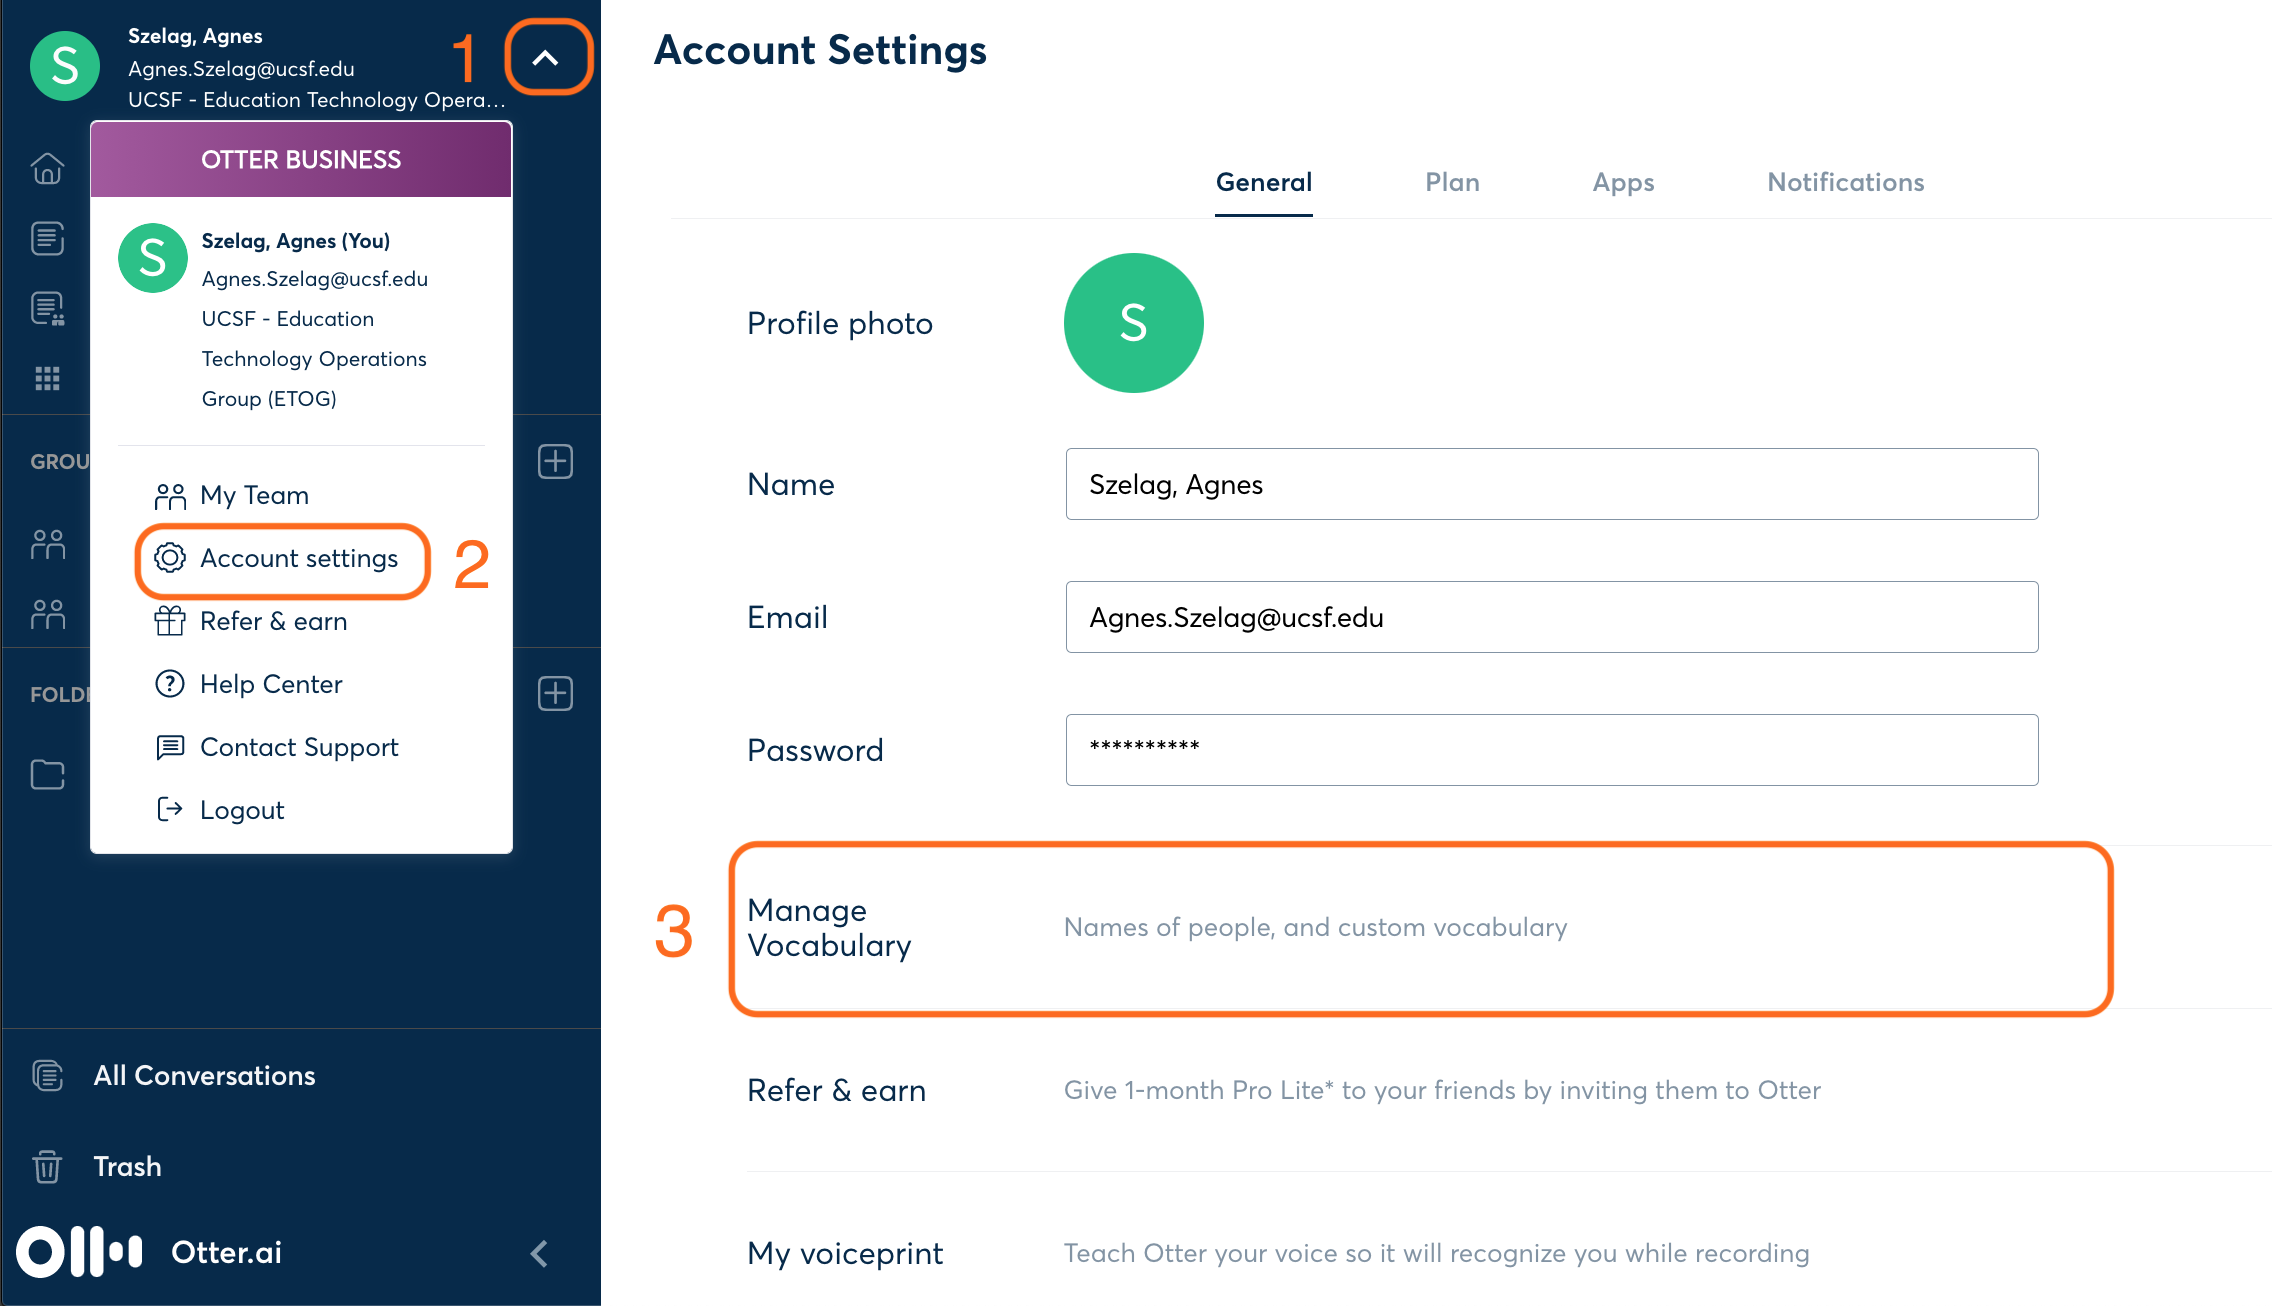 screenshot of account settings page on otter.ai showing manage vocabulary option